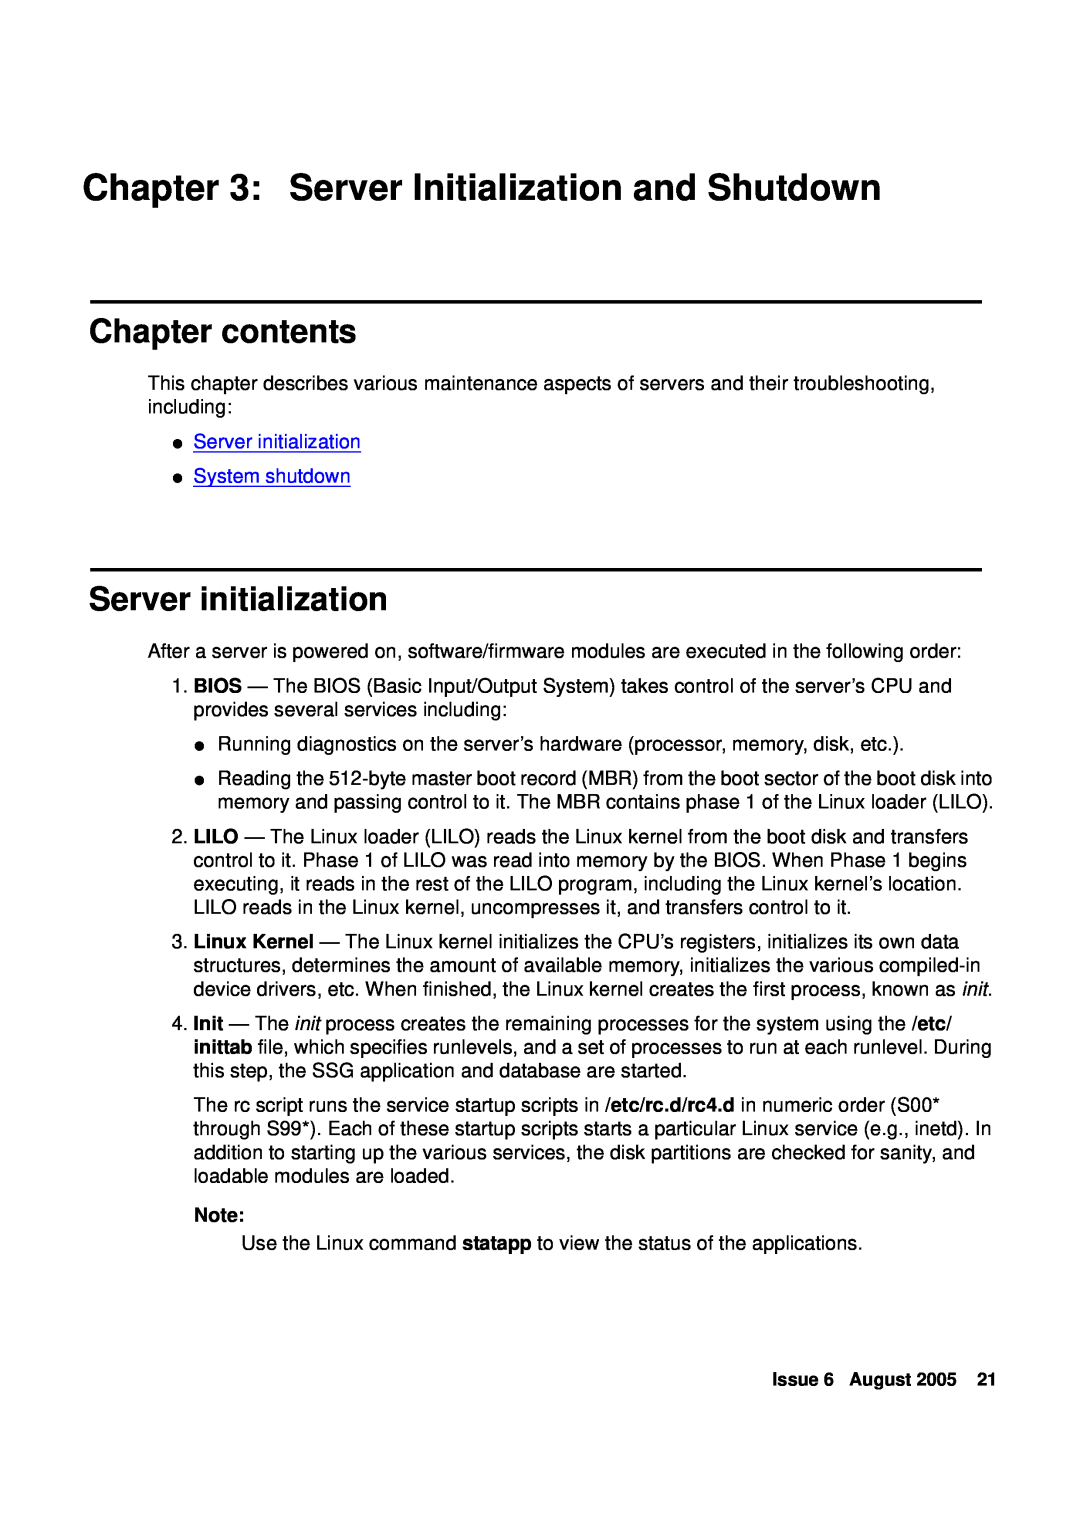 Avaya R3.0 manual Server Initialization and Shutdown, Server initialization System shutdown, Chapter contents 